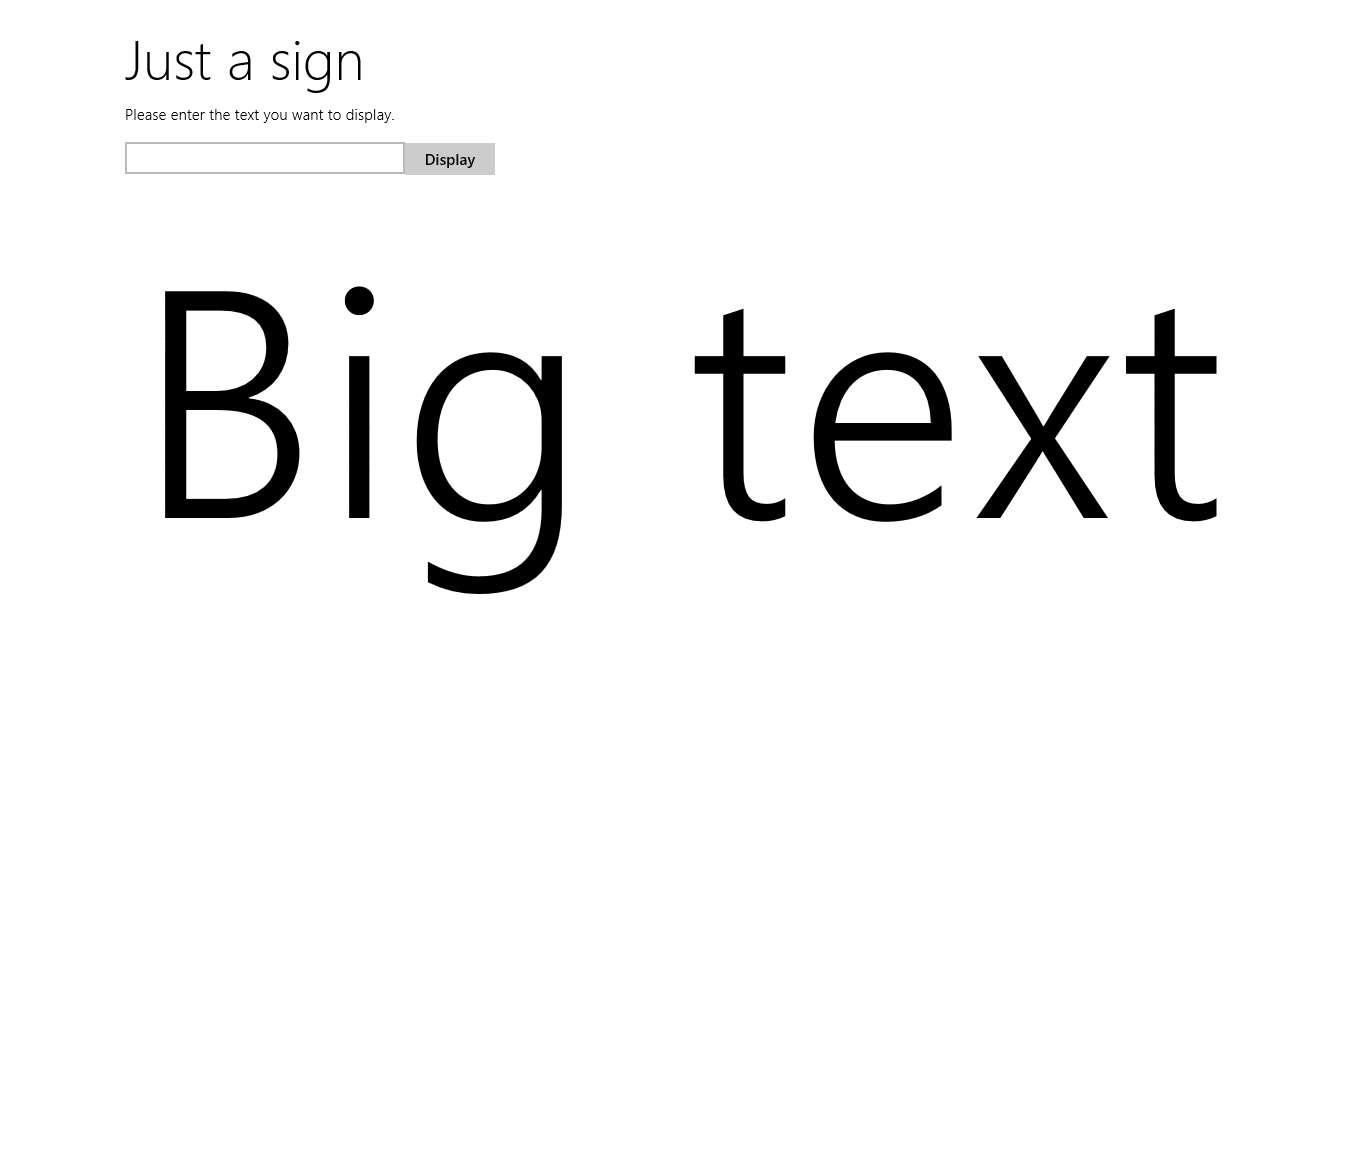 Enter the text to display